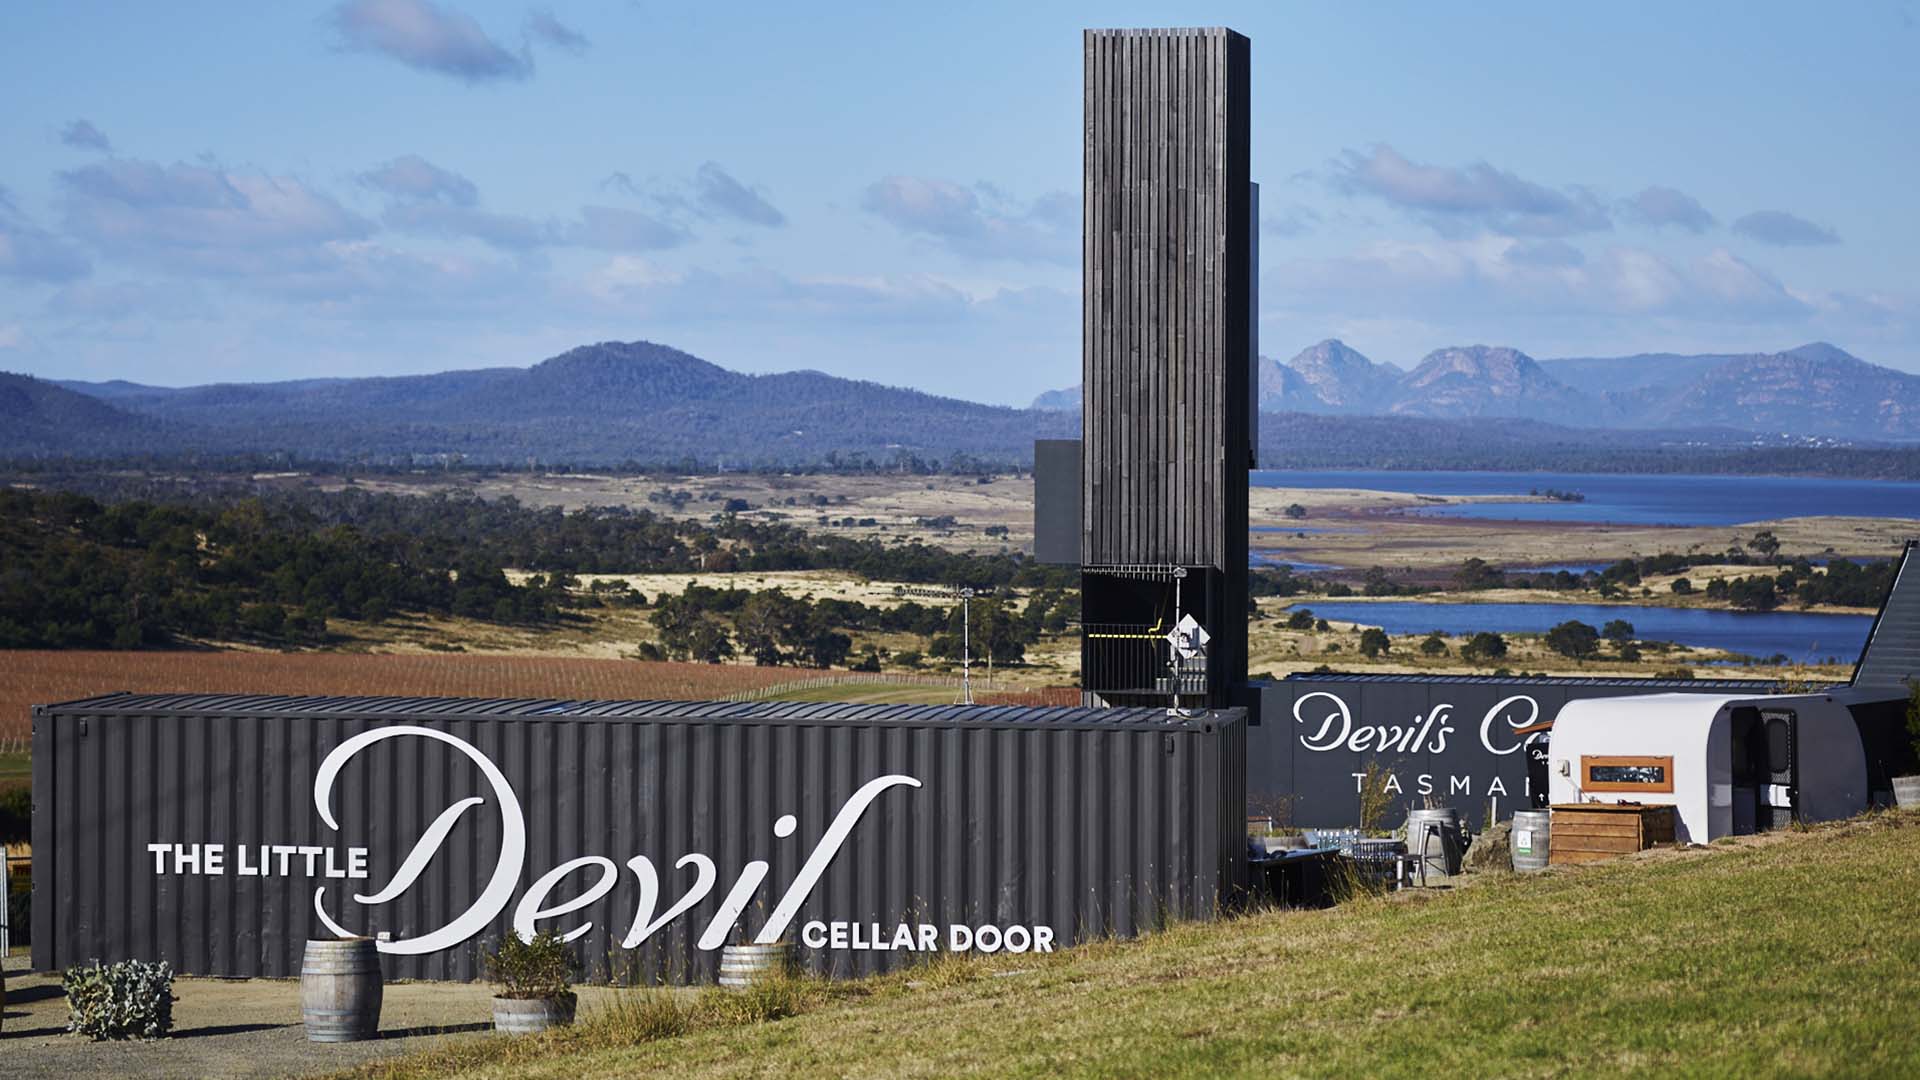 Tasmania's Devil's Corner Has Opened a Pop-Up Cellar Door While Its Current Site Gets a Revamp